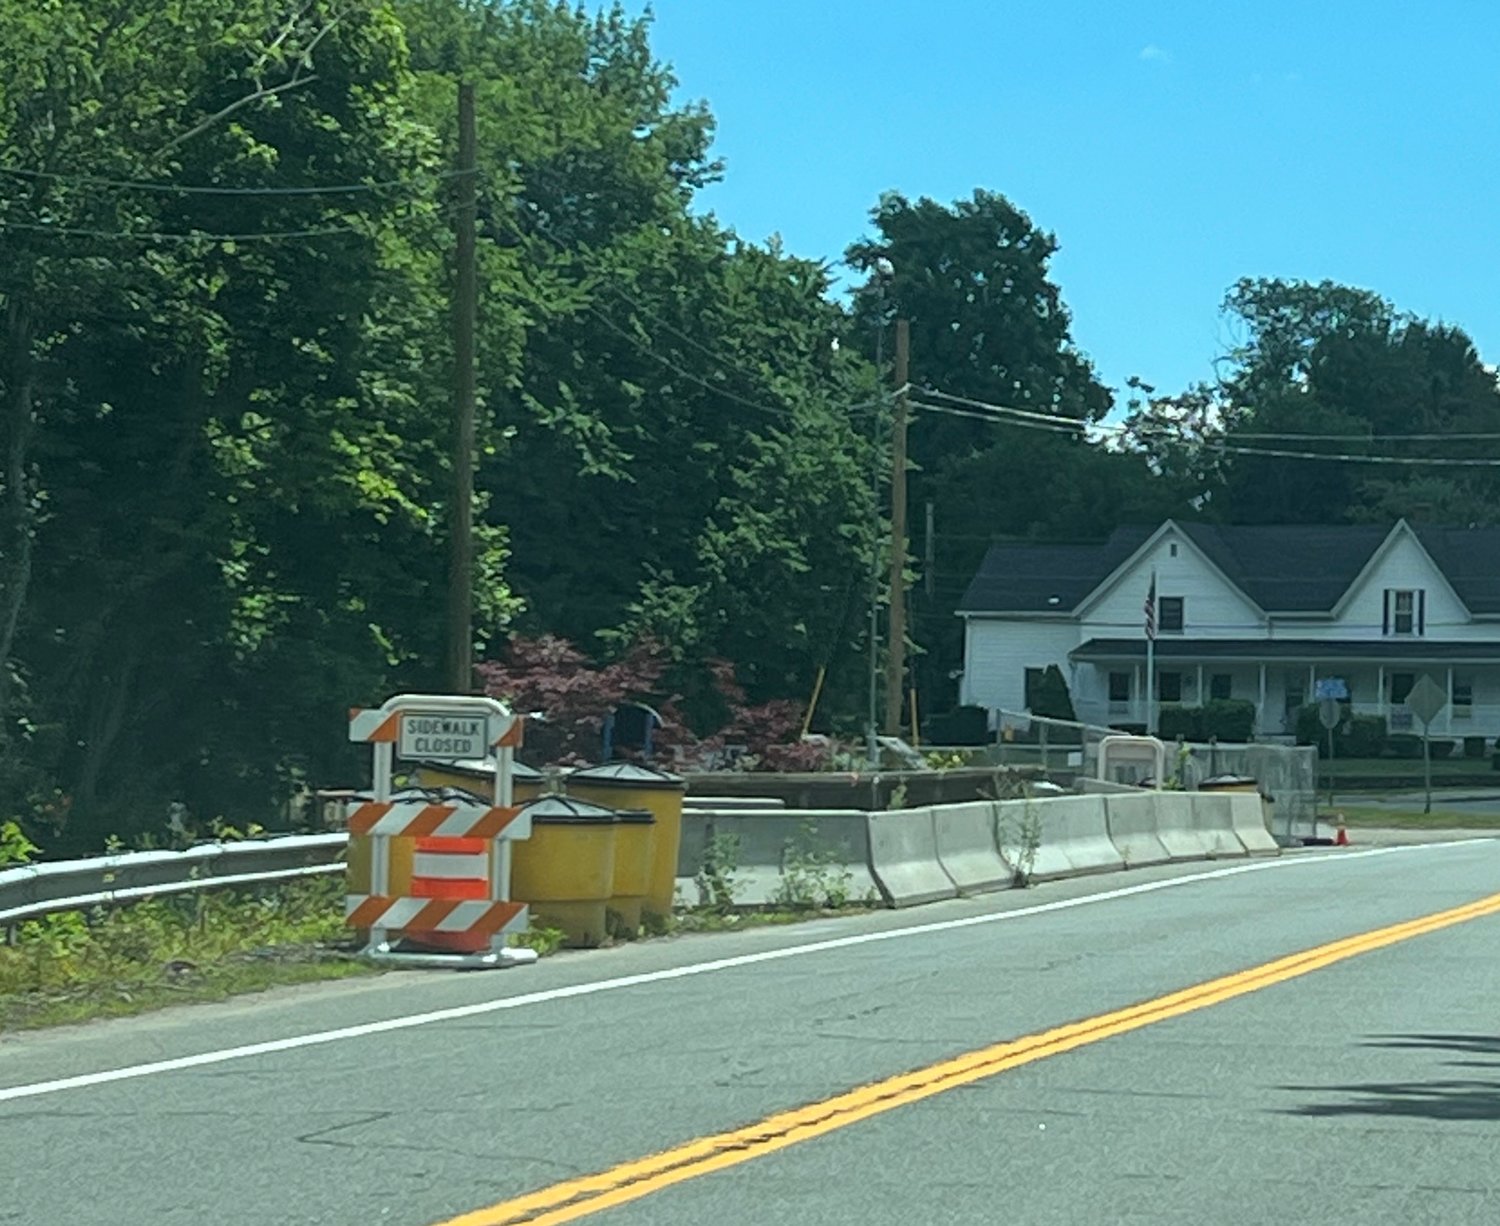 For the last several weeks, RIDOT has been preparing the temporary closure of the Hunts Mills Bridge for redevelopment.